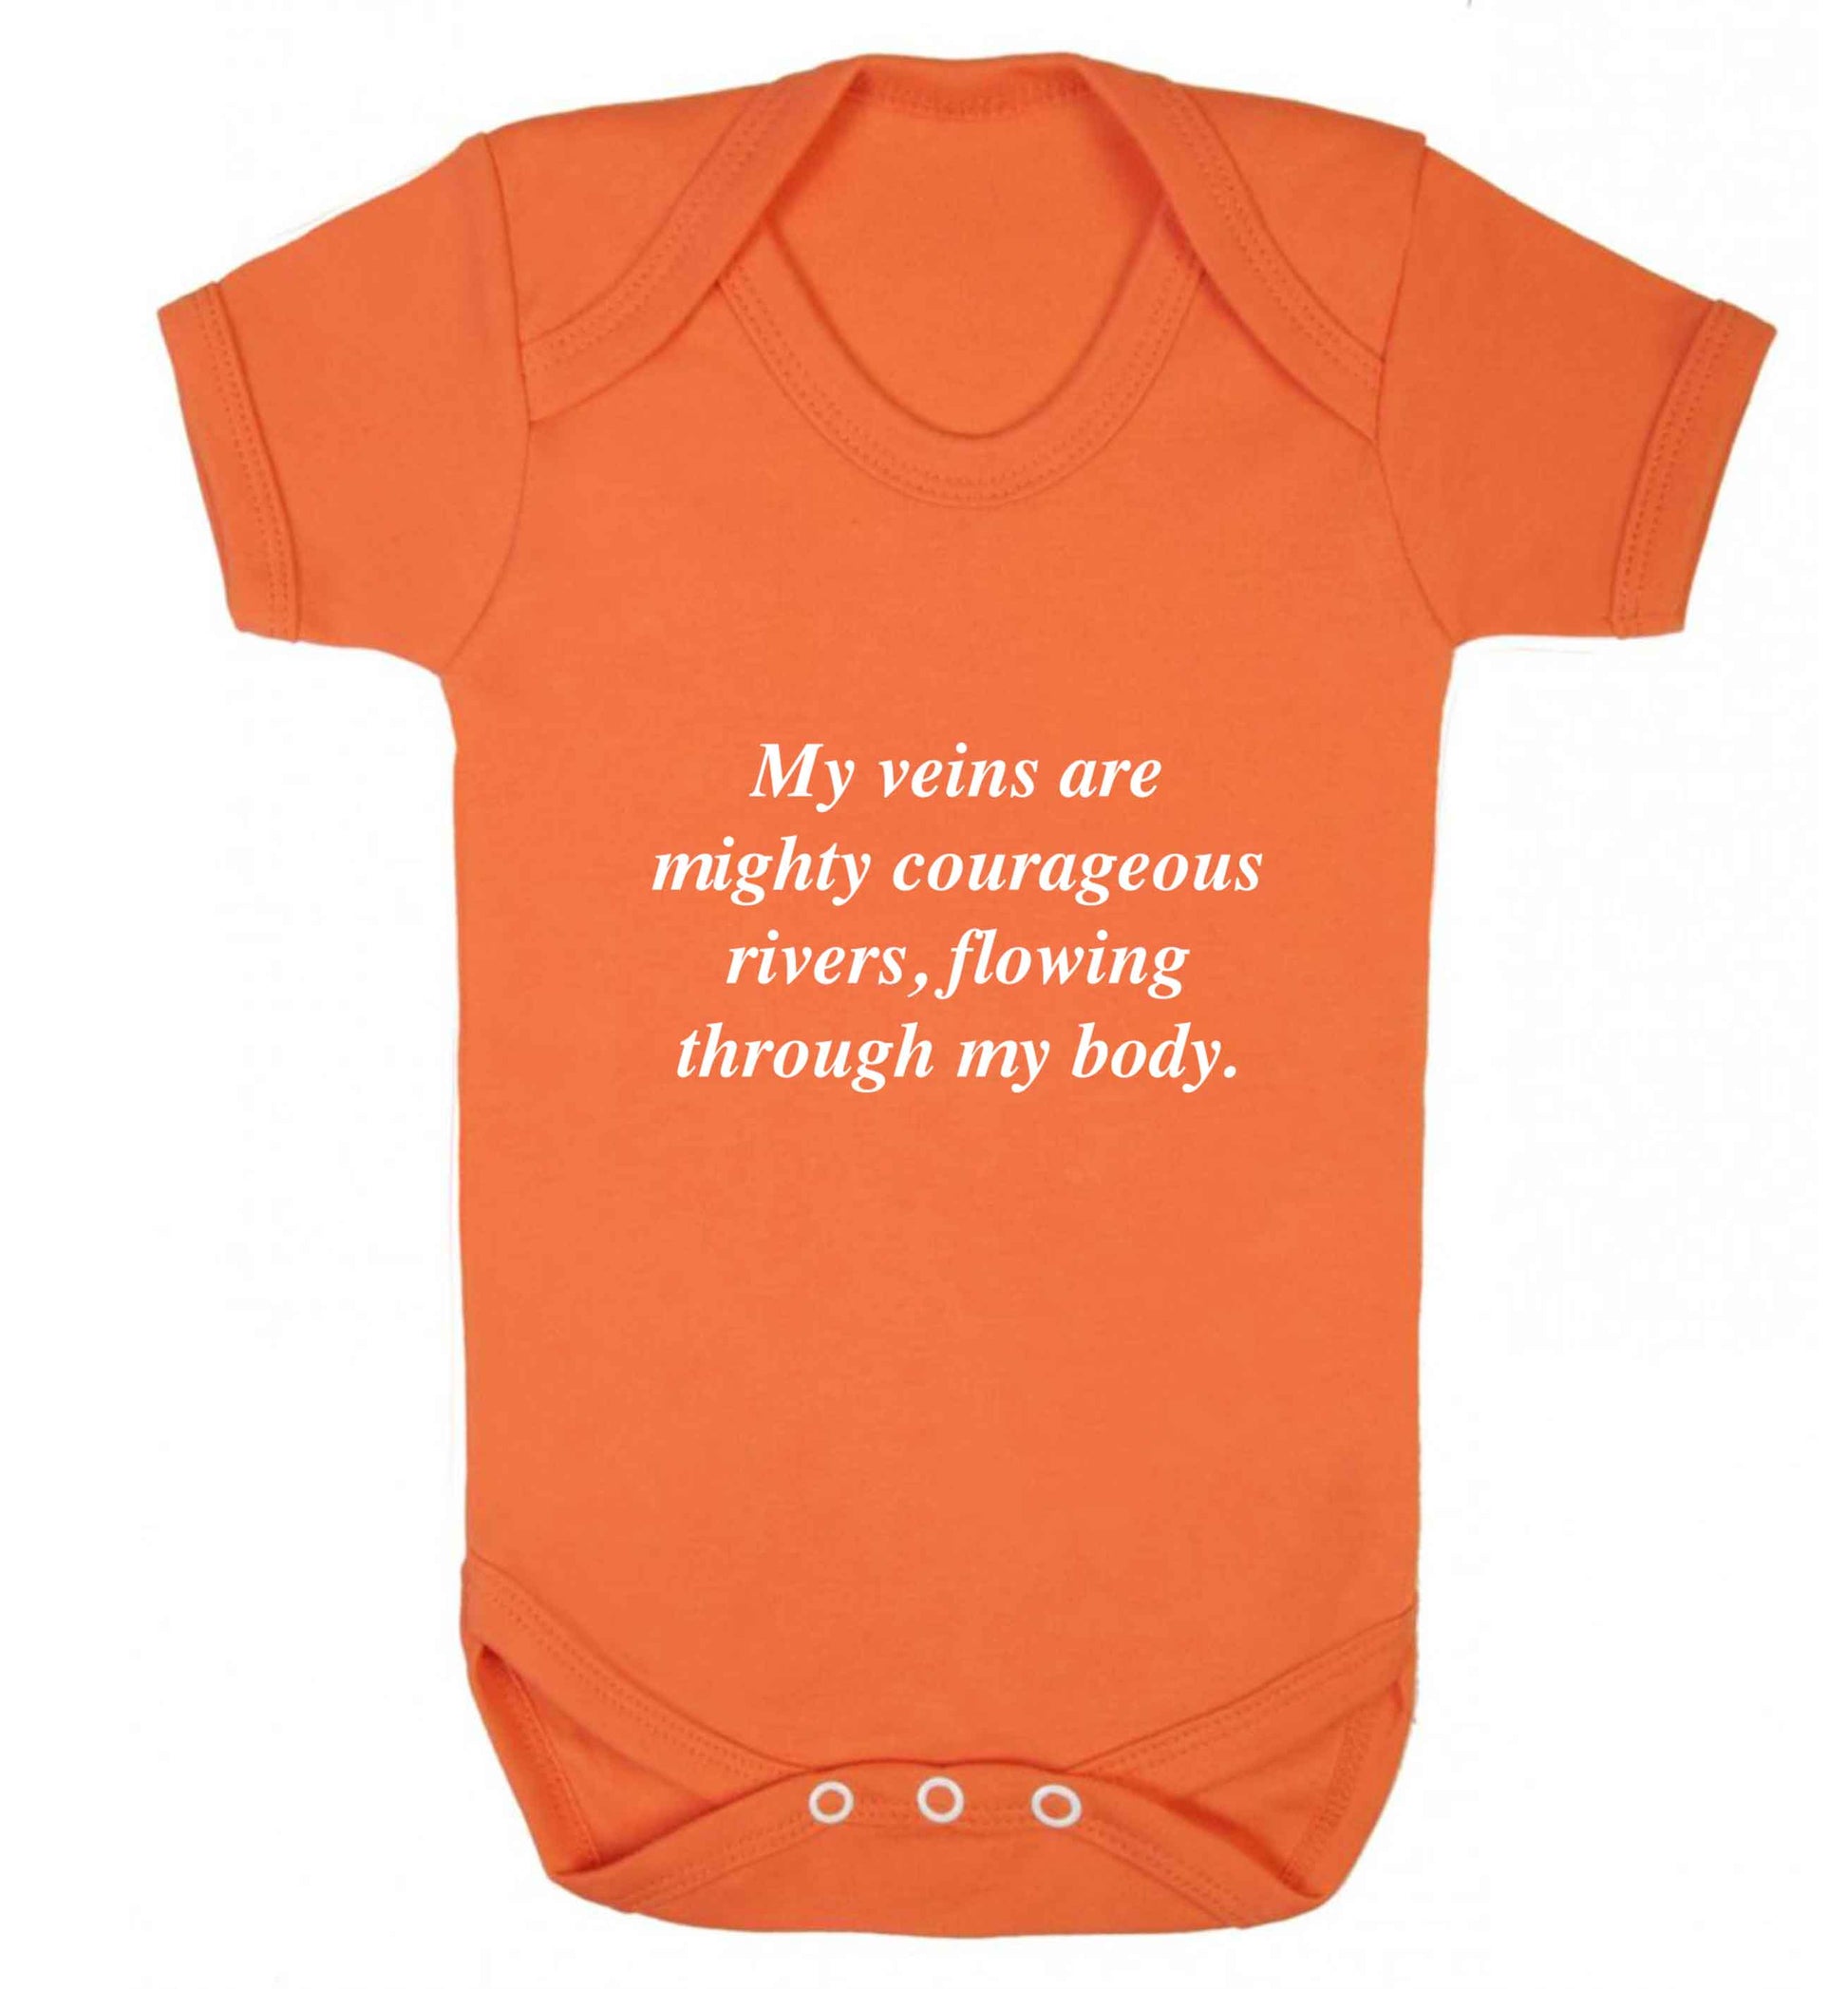 My veins are mighty courageous rivers, flowing through my body baby vest orange 18-24 months